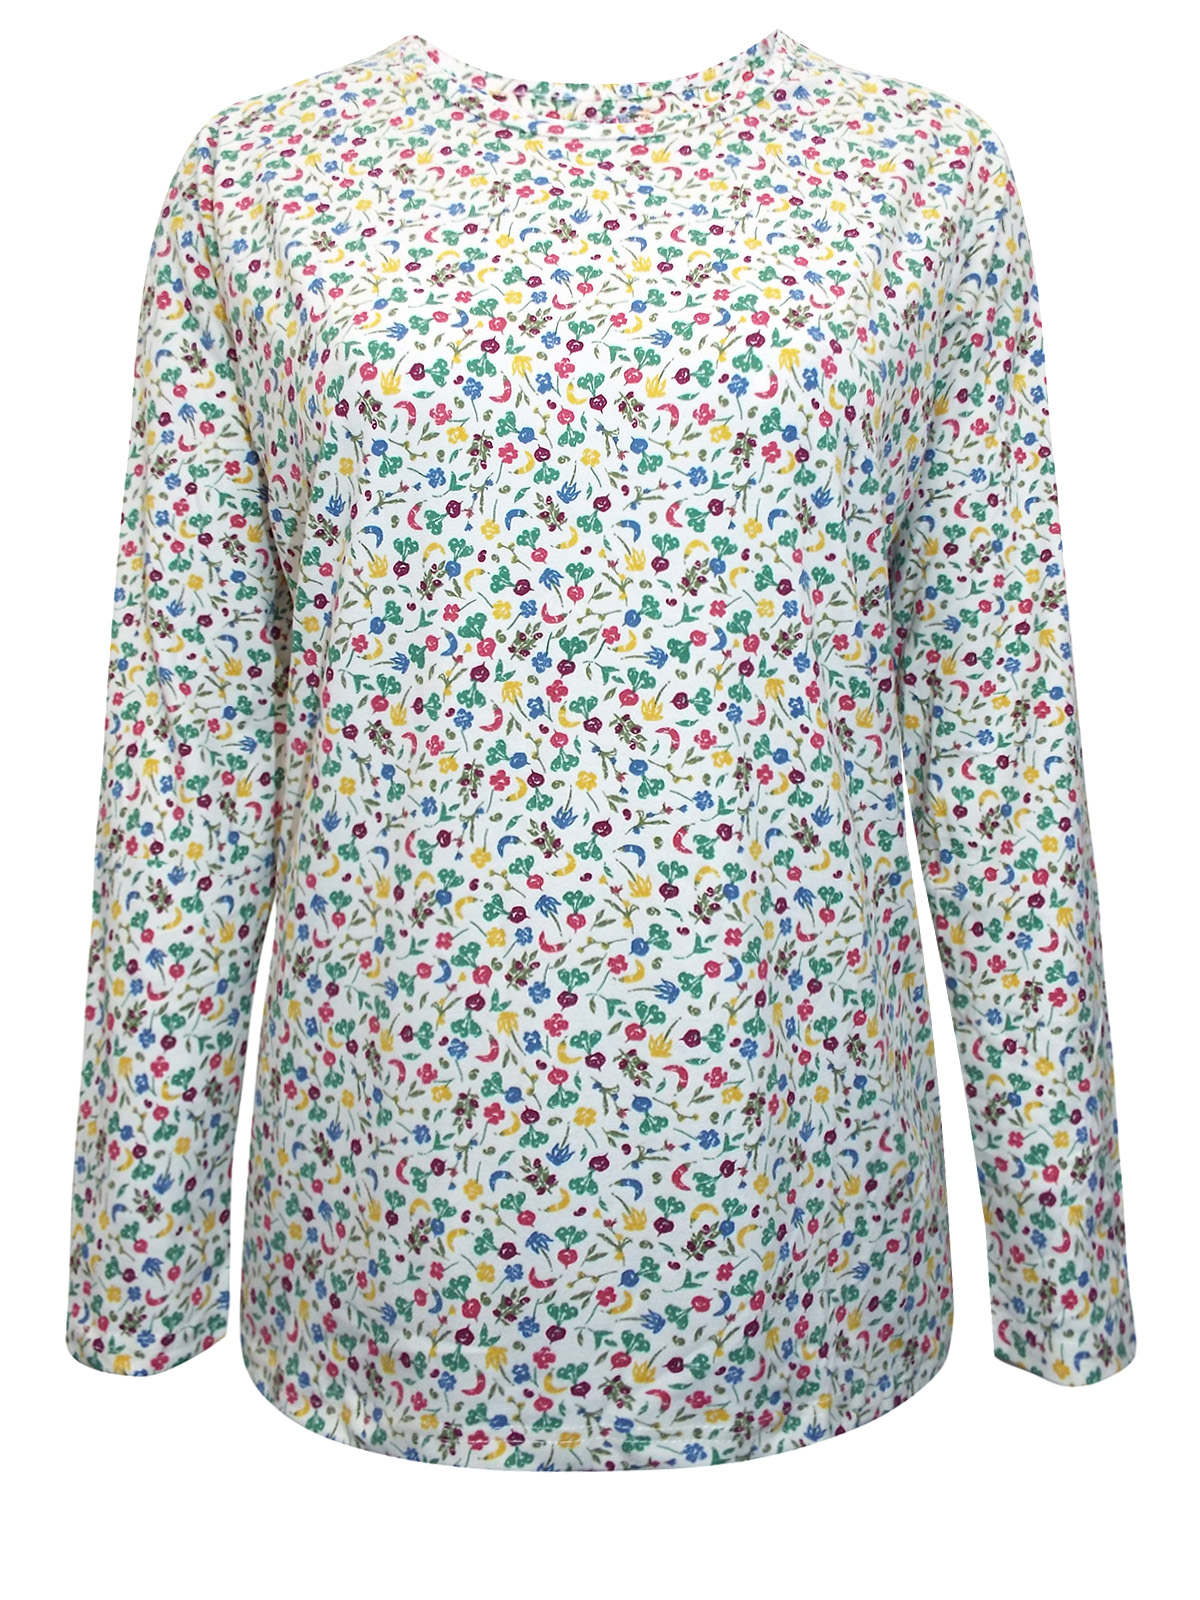 Country Rose - - Country Rose CREAM Floral Print Long Sleeve Thermal Top -  Plus Size 14/16 to 22/